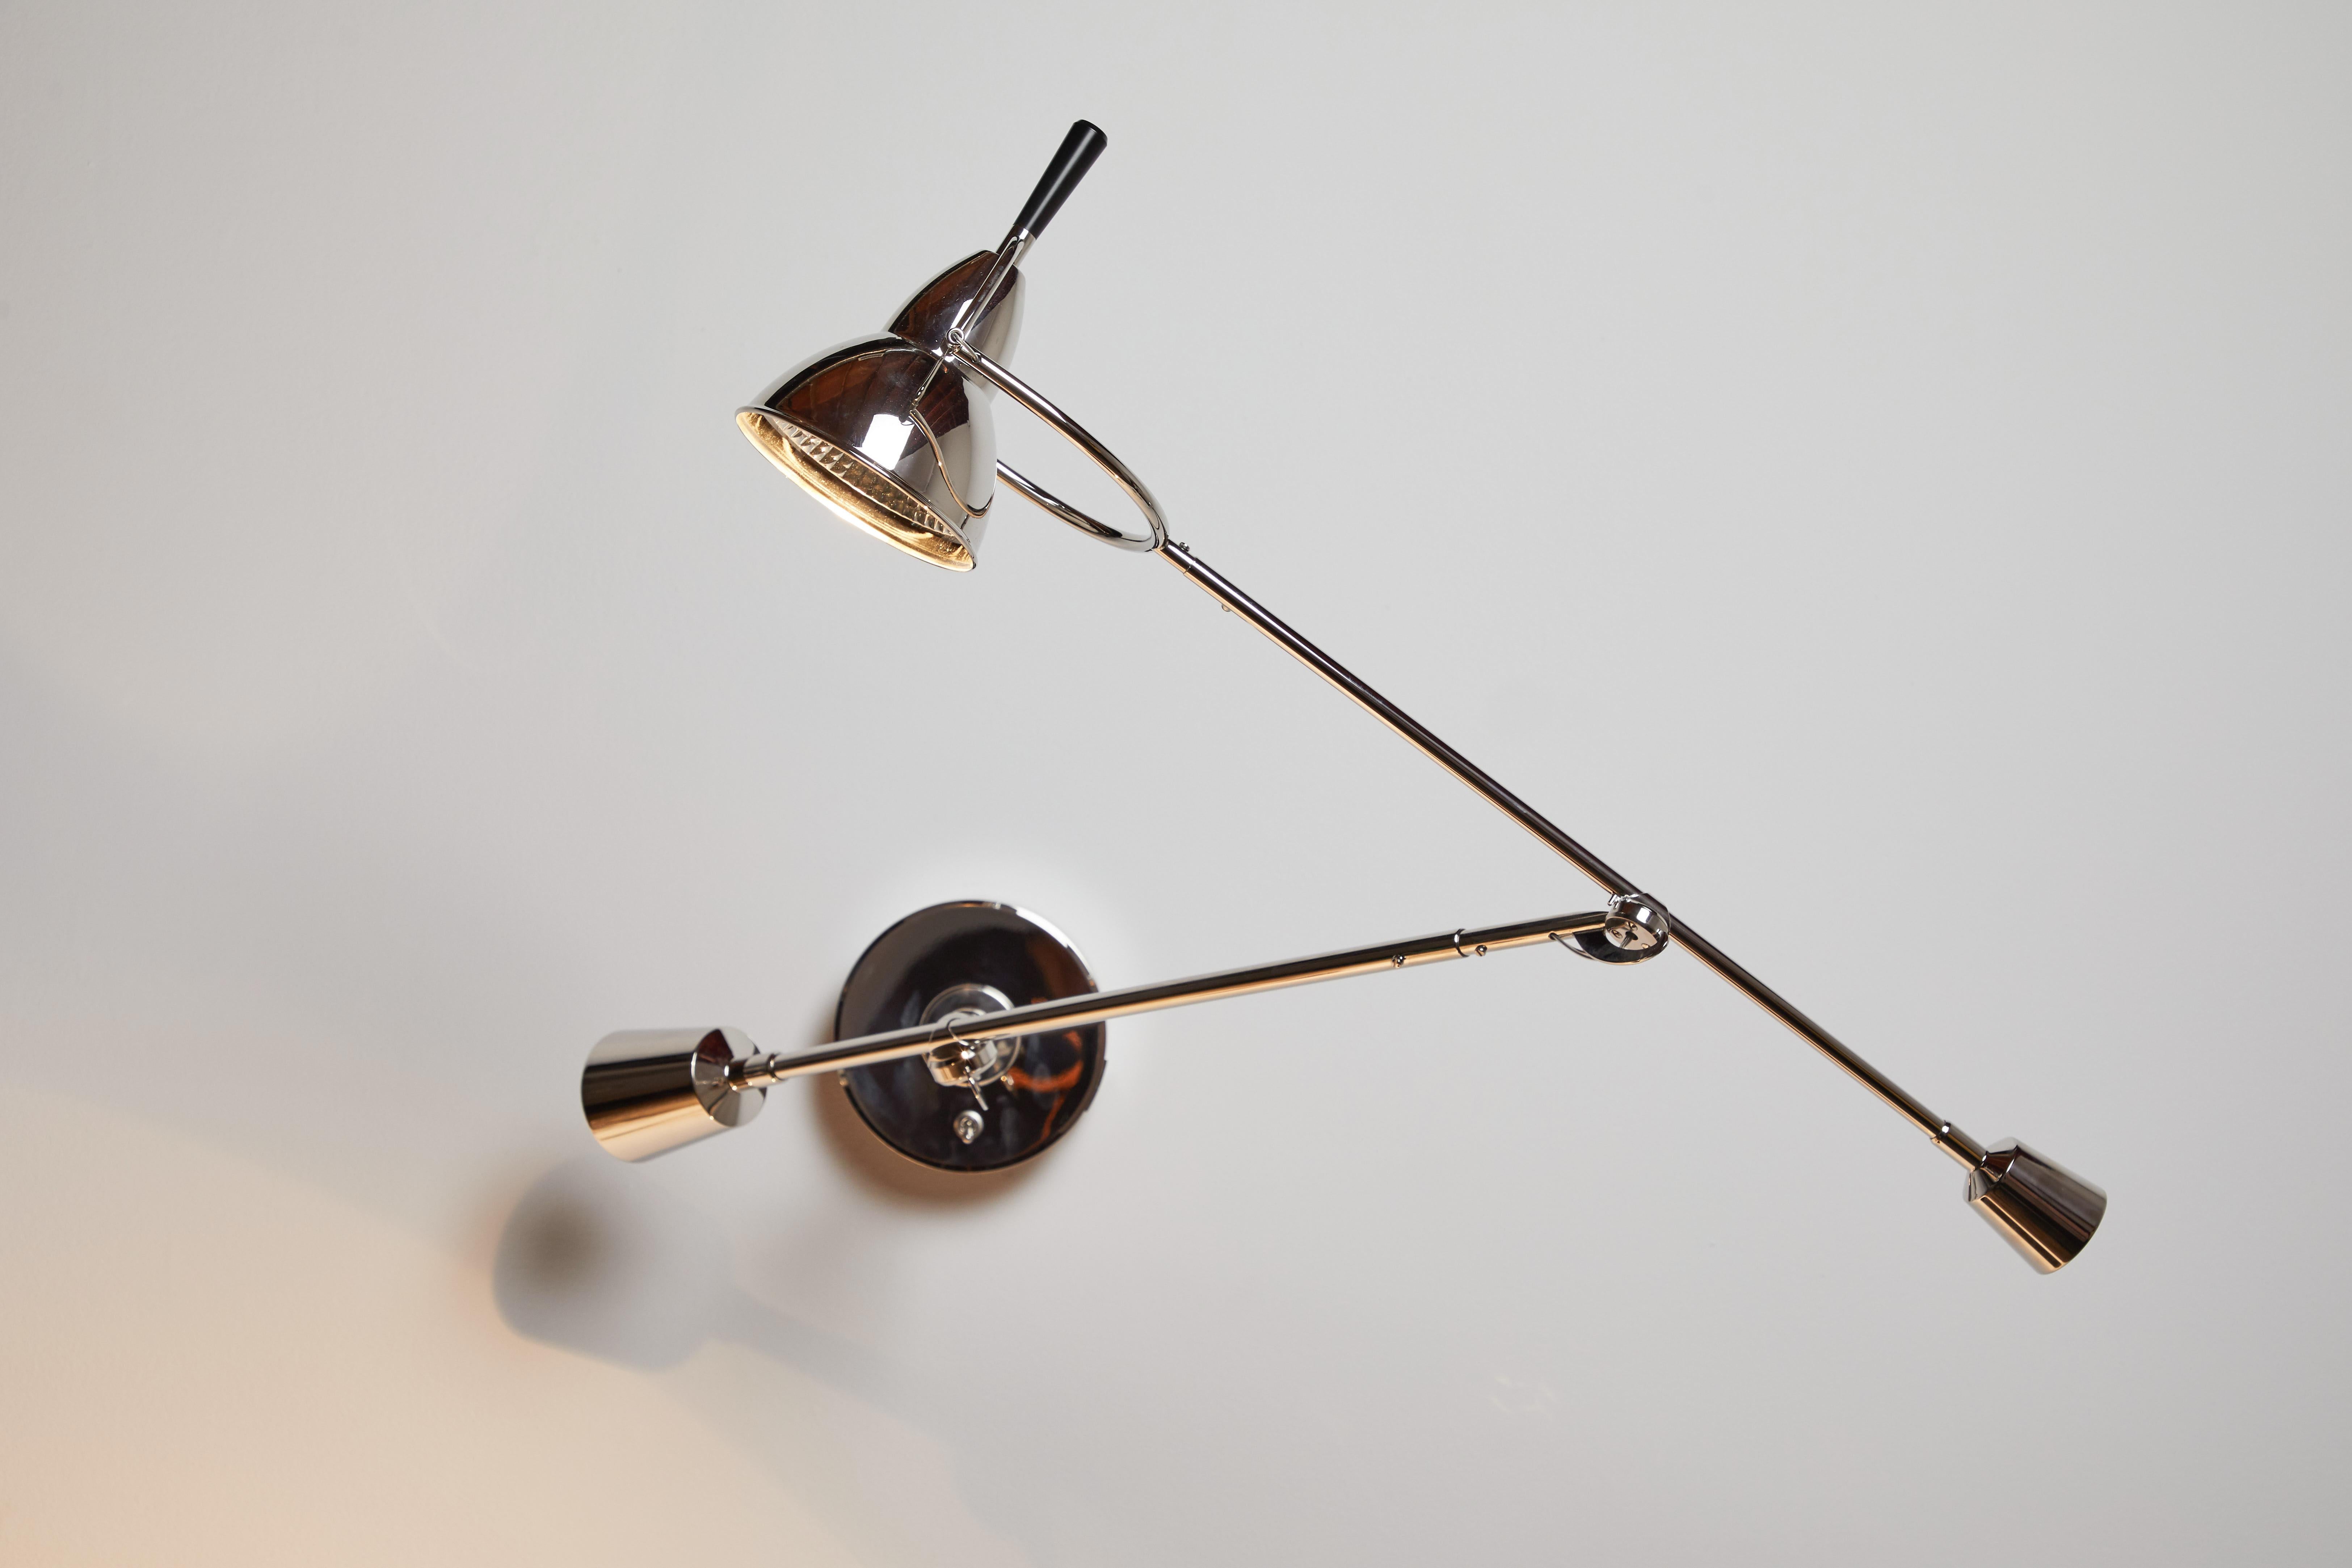 Model EB 27 wall light by Eduard-Wilfrid Buquet. Originally designed in 1927. Current production manufactured in Germany for Tecnolumen. Nickel plated metal. Wired for U.S junction boxes. Shade and arms adjust to various positions. Takes one GY